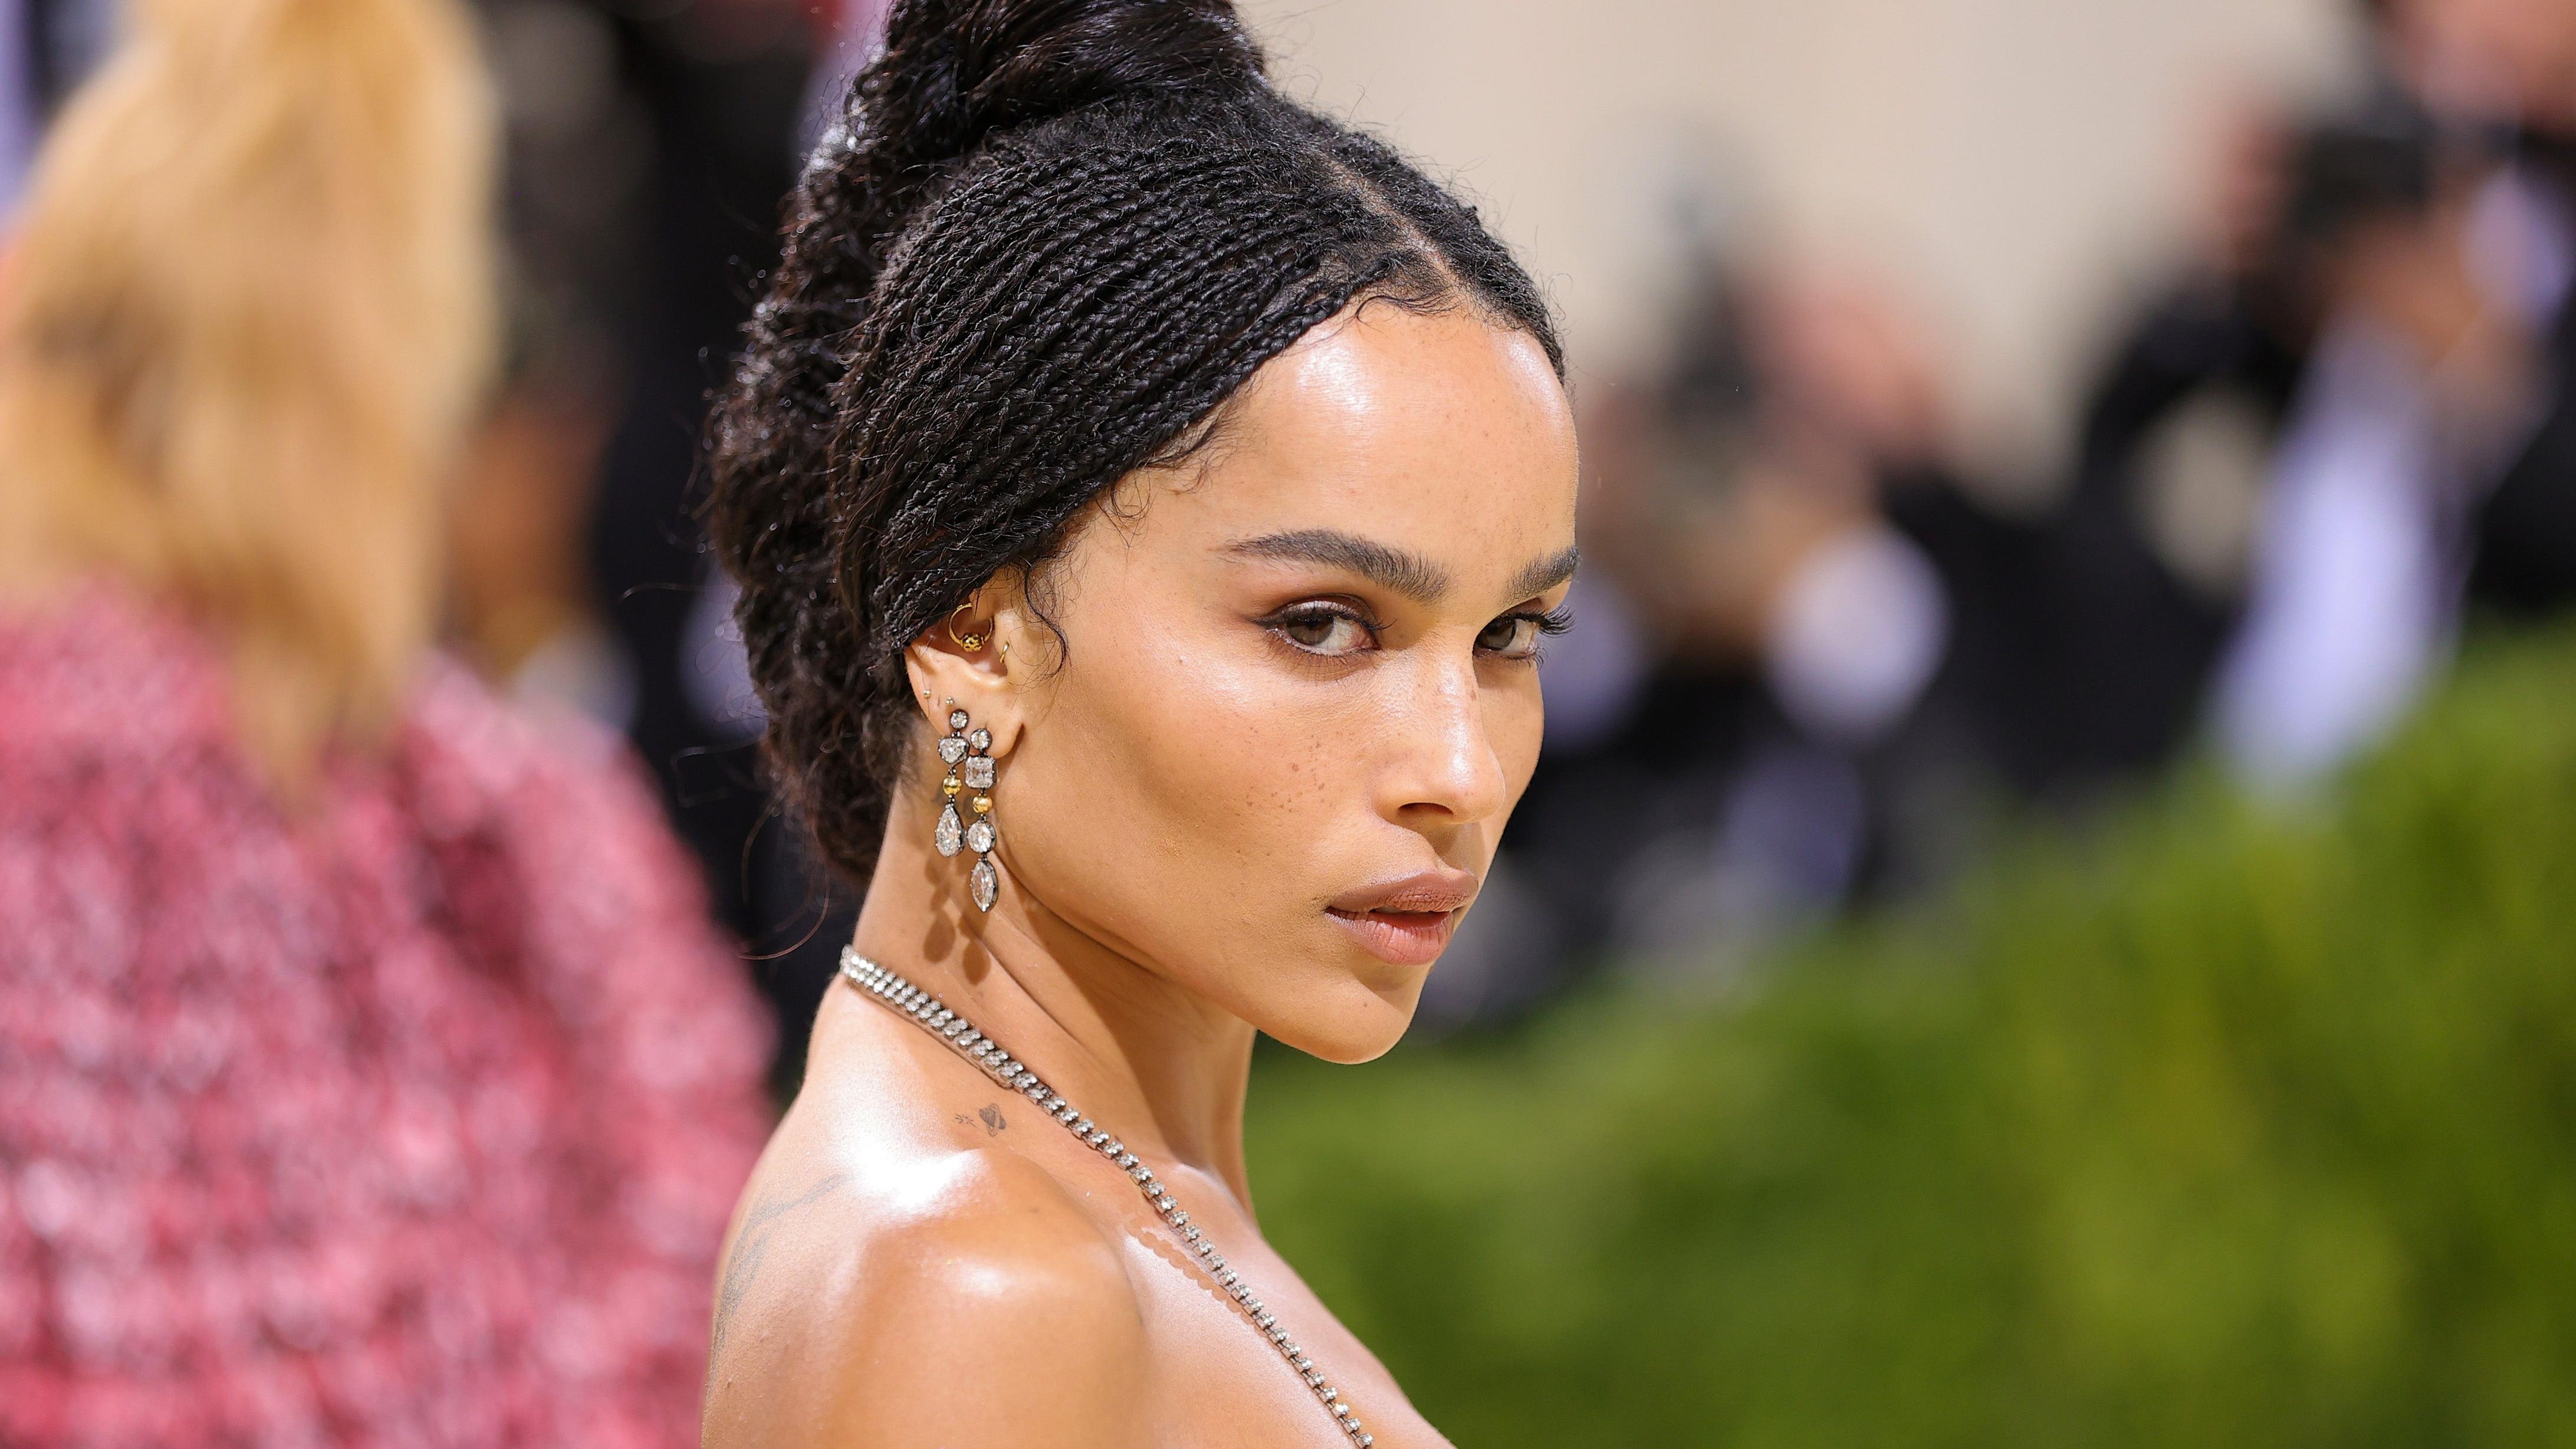 Zoë Kravitz watched lions and cats fighting to prepare for Catwoman’s fight scenes in The Batman